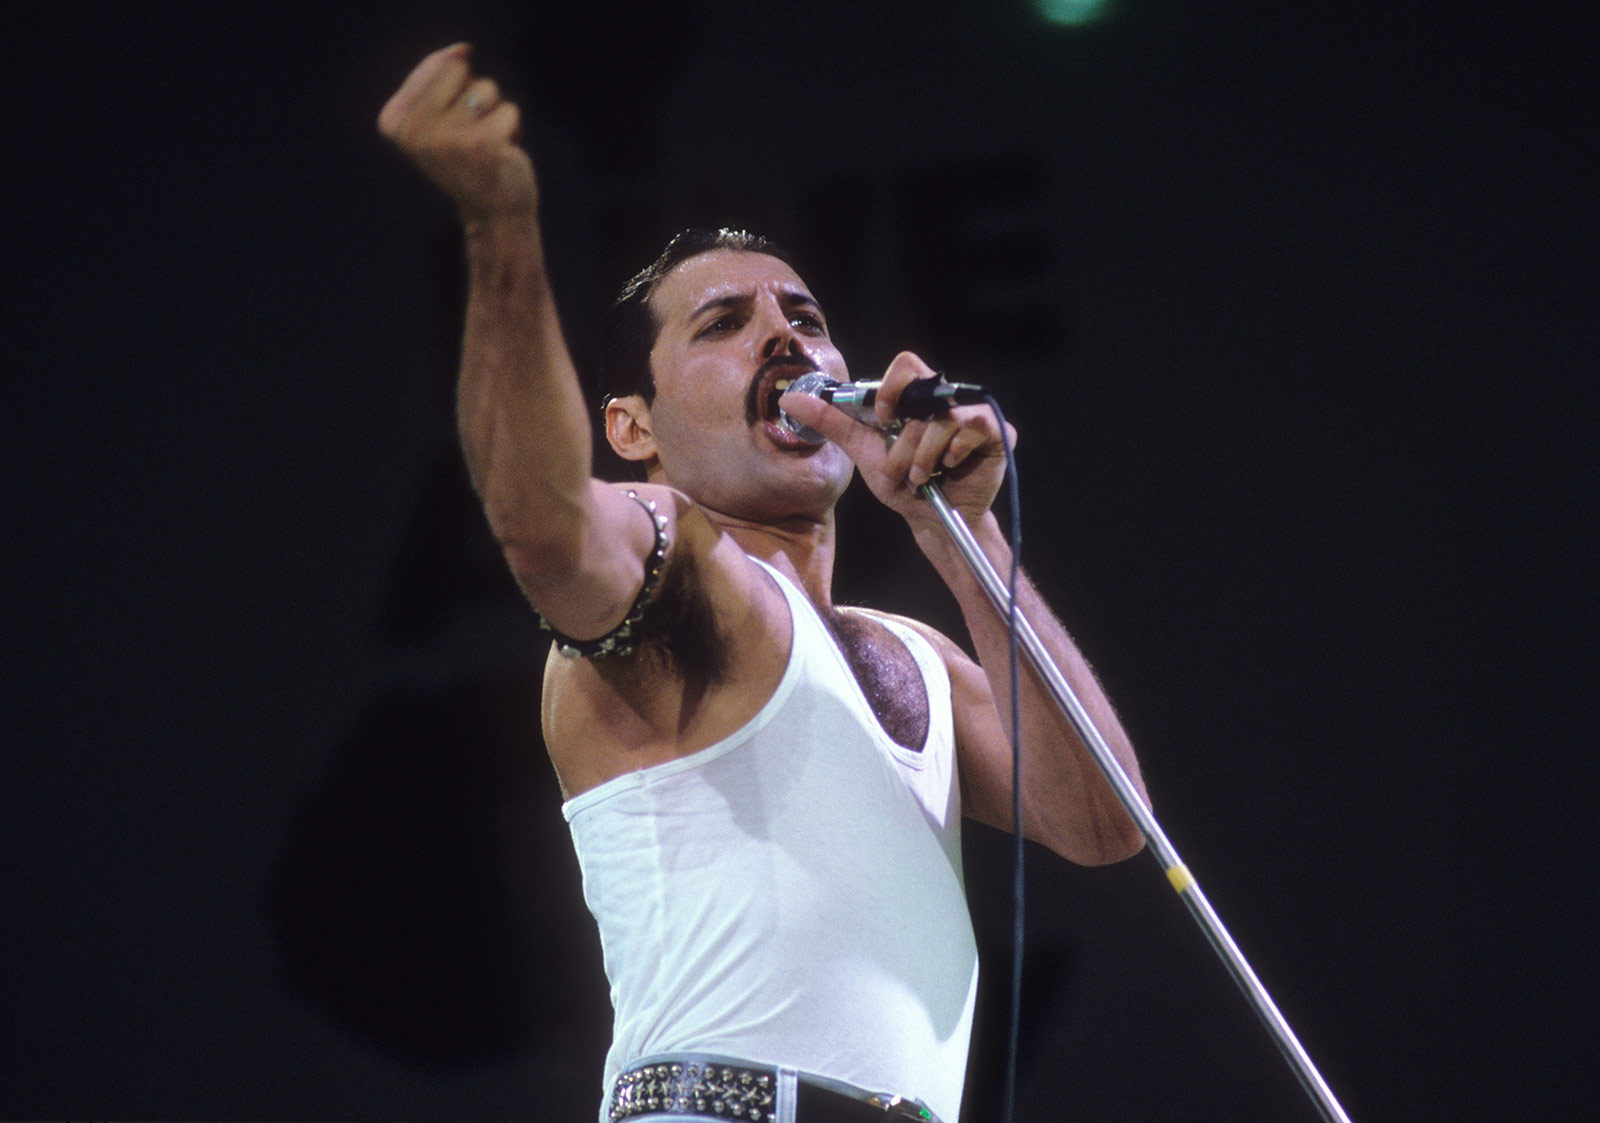 33 years later, Queen's Live Aid performance is still pure magic - CNN.com